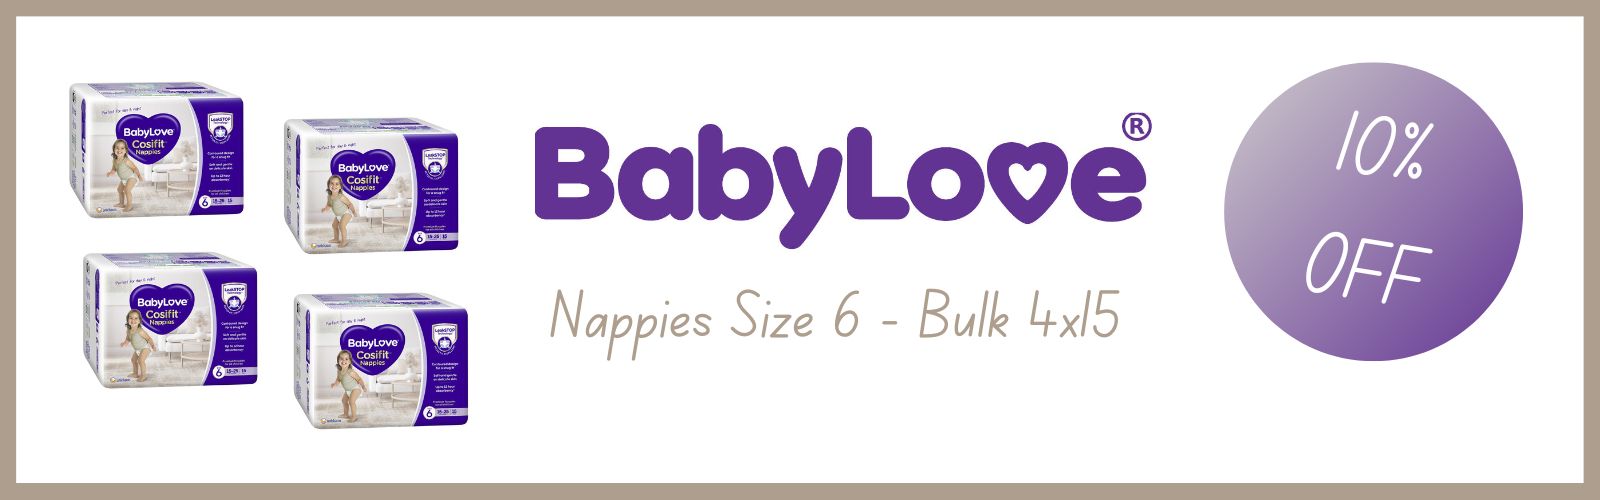 Image of 10% Off Babylux Size 6 Nappies 